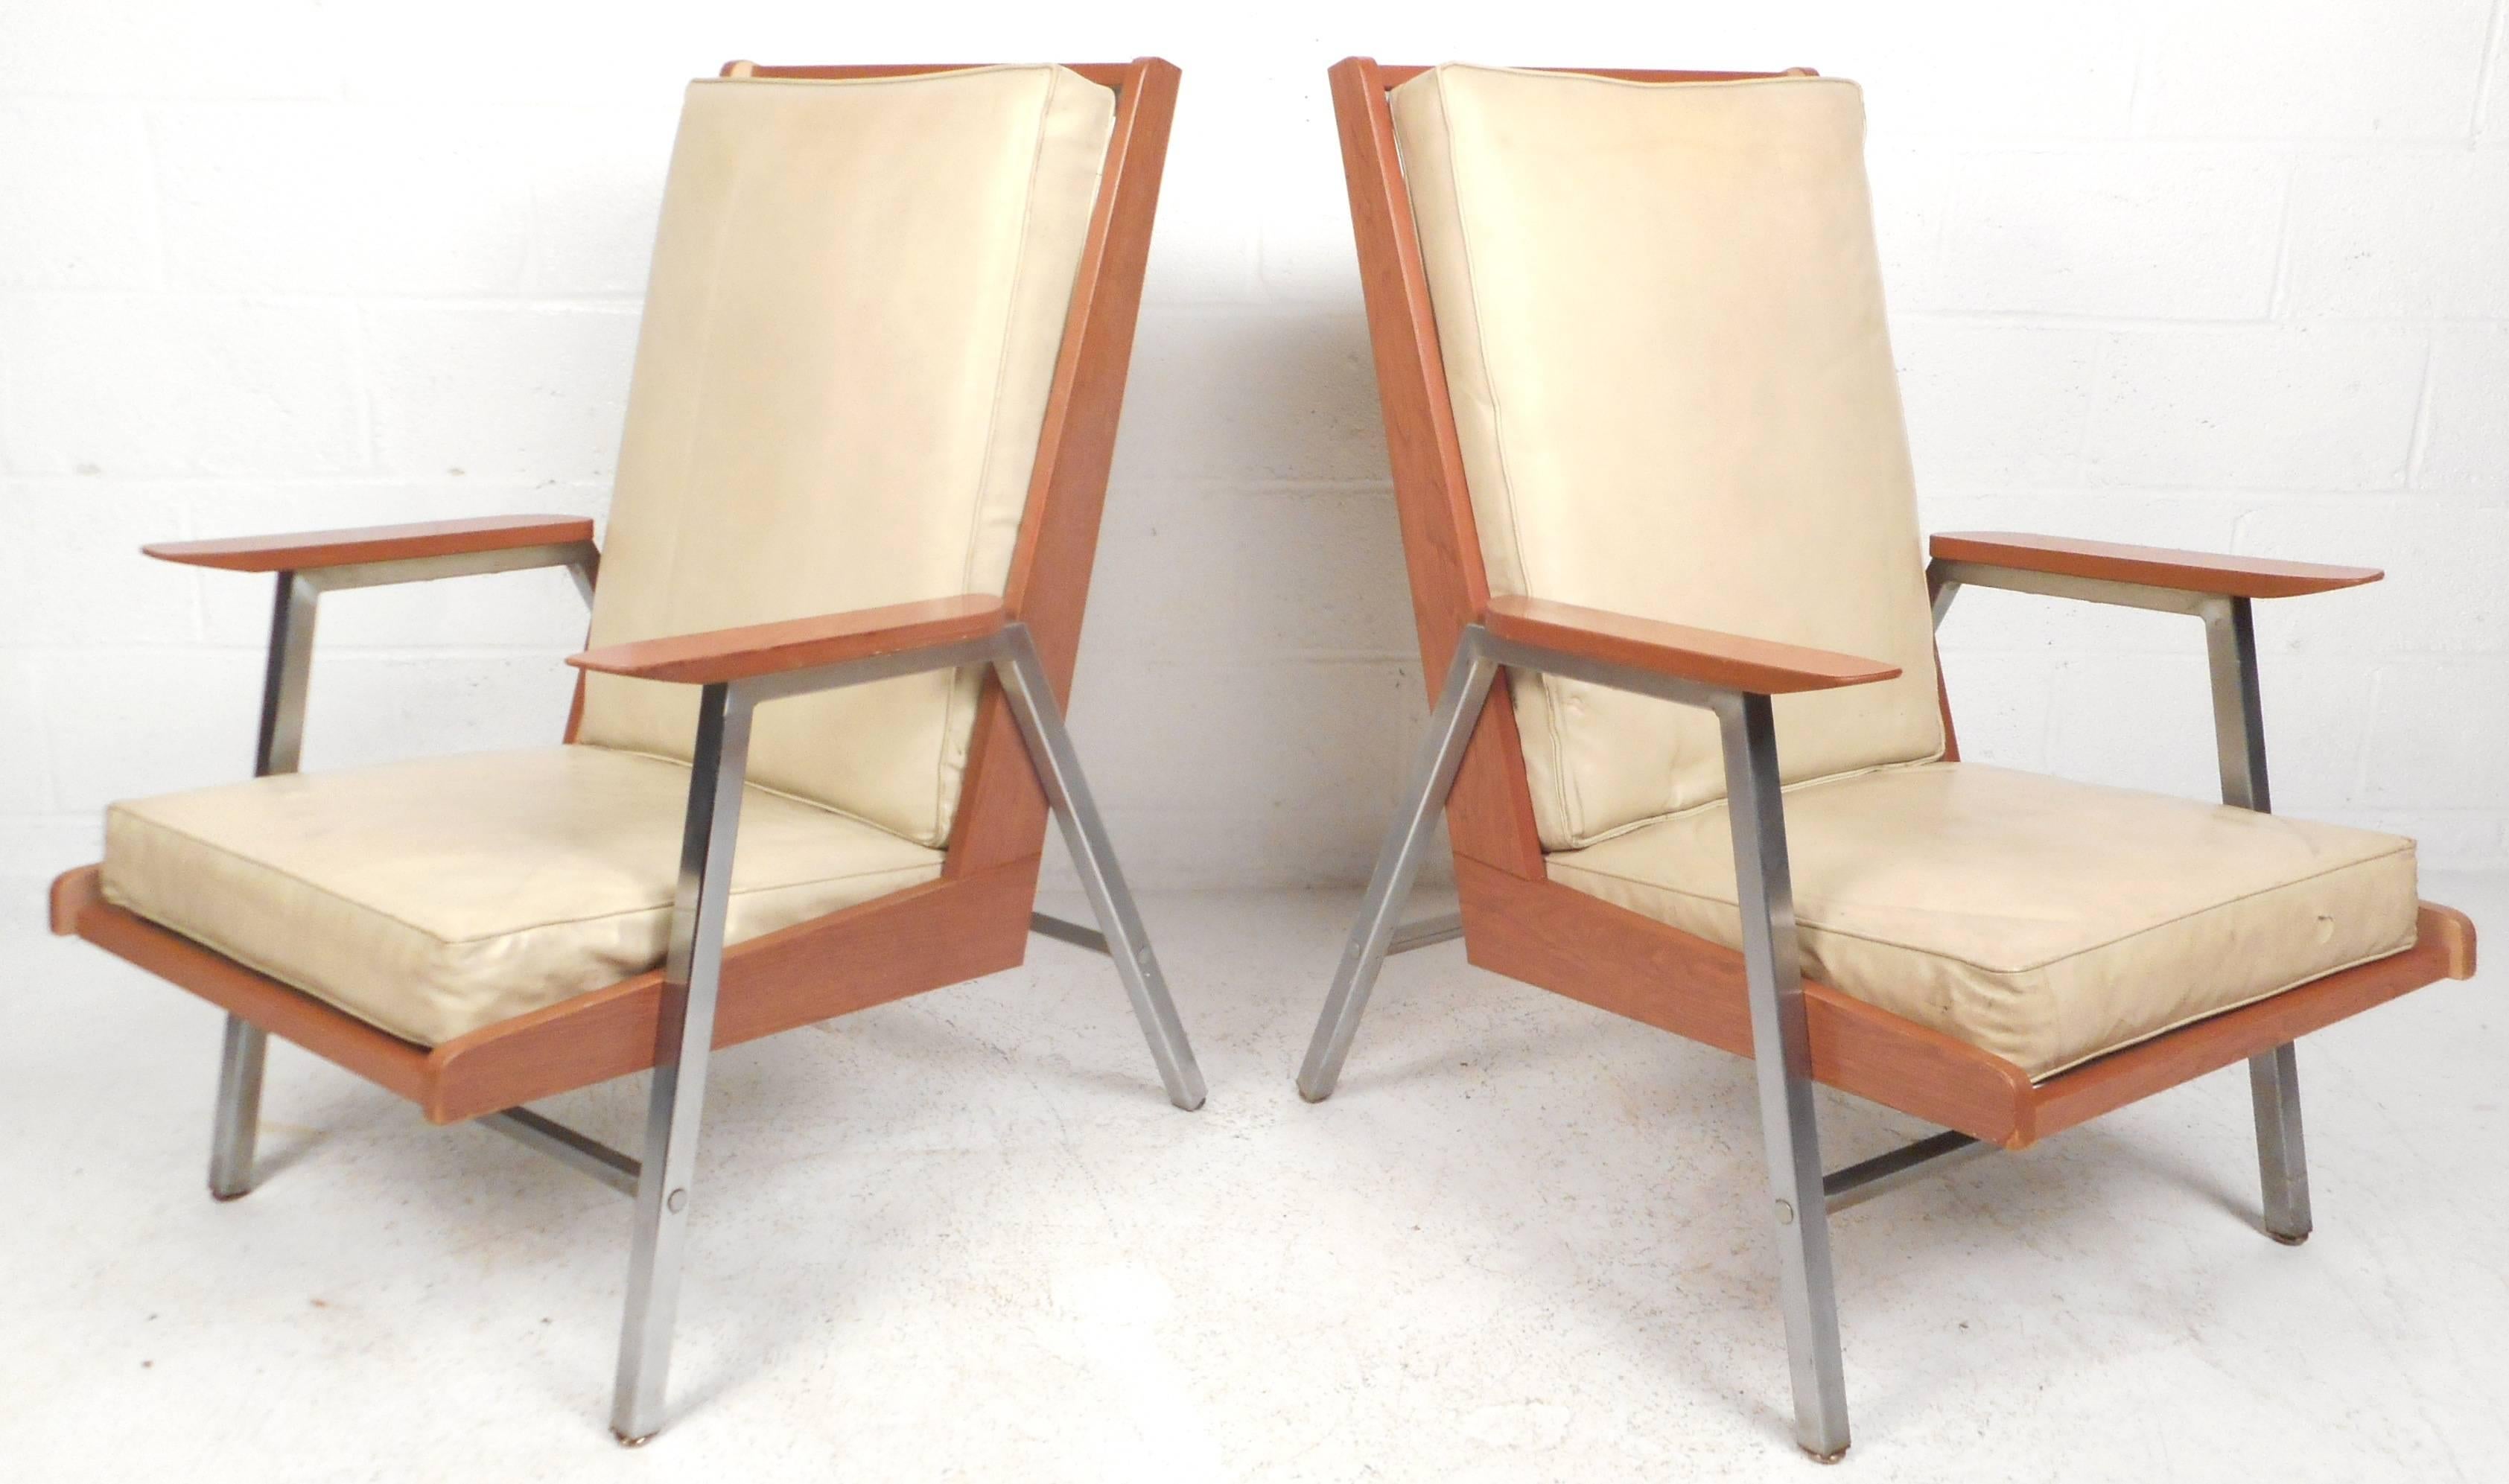 Elegant pair of vintage modern lounge chairs feature a two-tone frame with heavy chrome and wood laminate. Unique design offers plenty of comfort with its high backrest, wide seating, and thick padded vinyl cushions. These sturdy and stylish